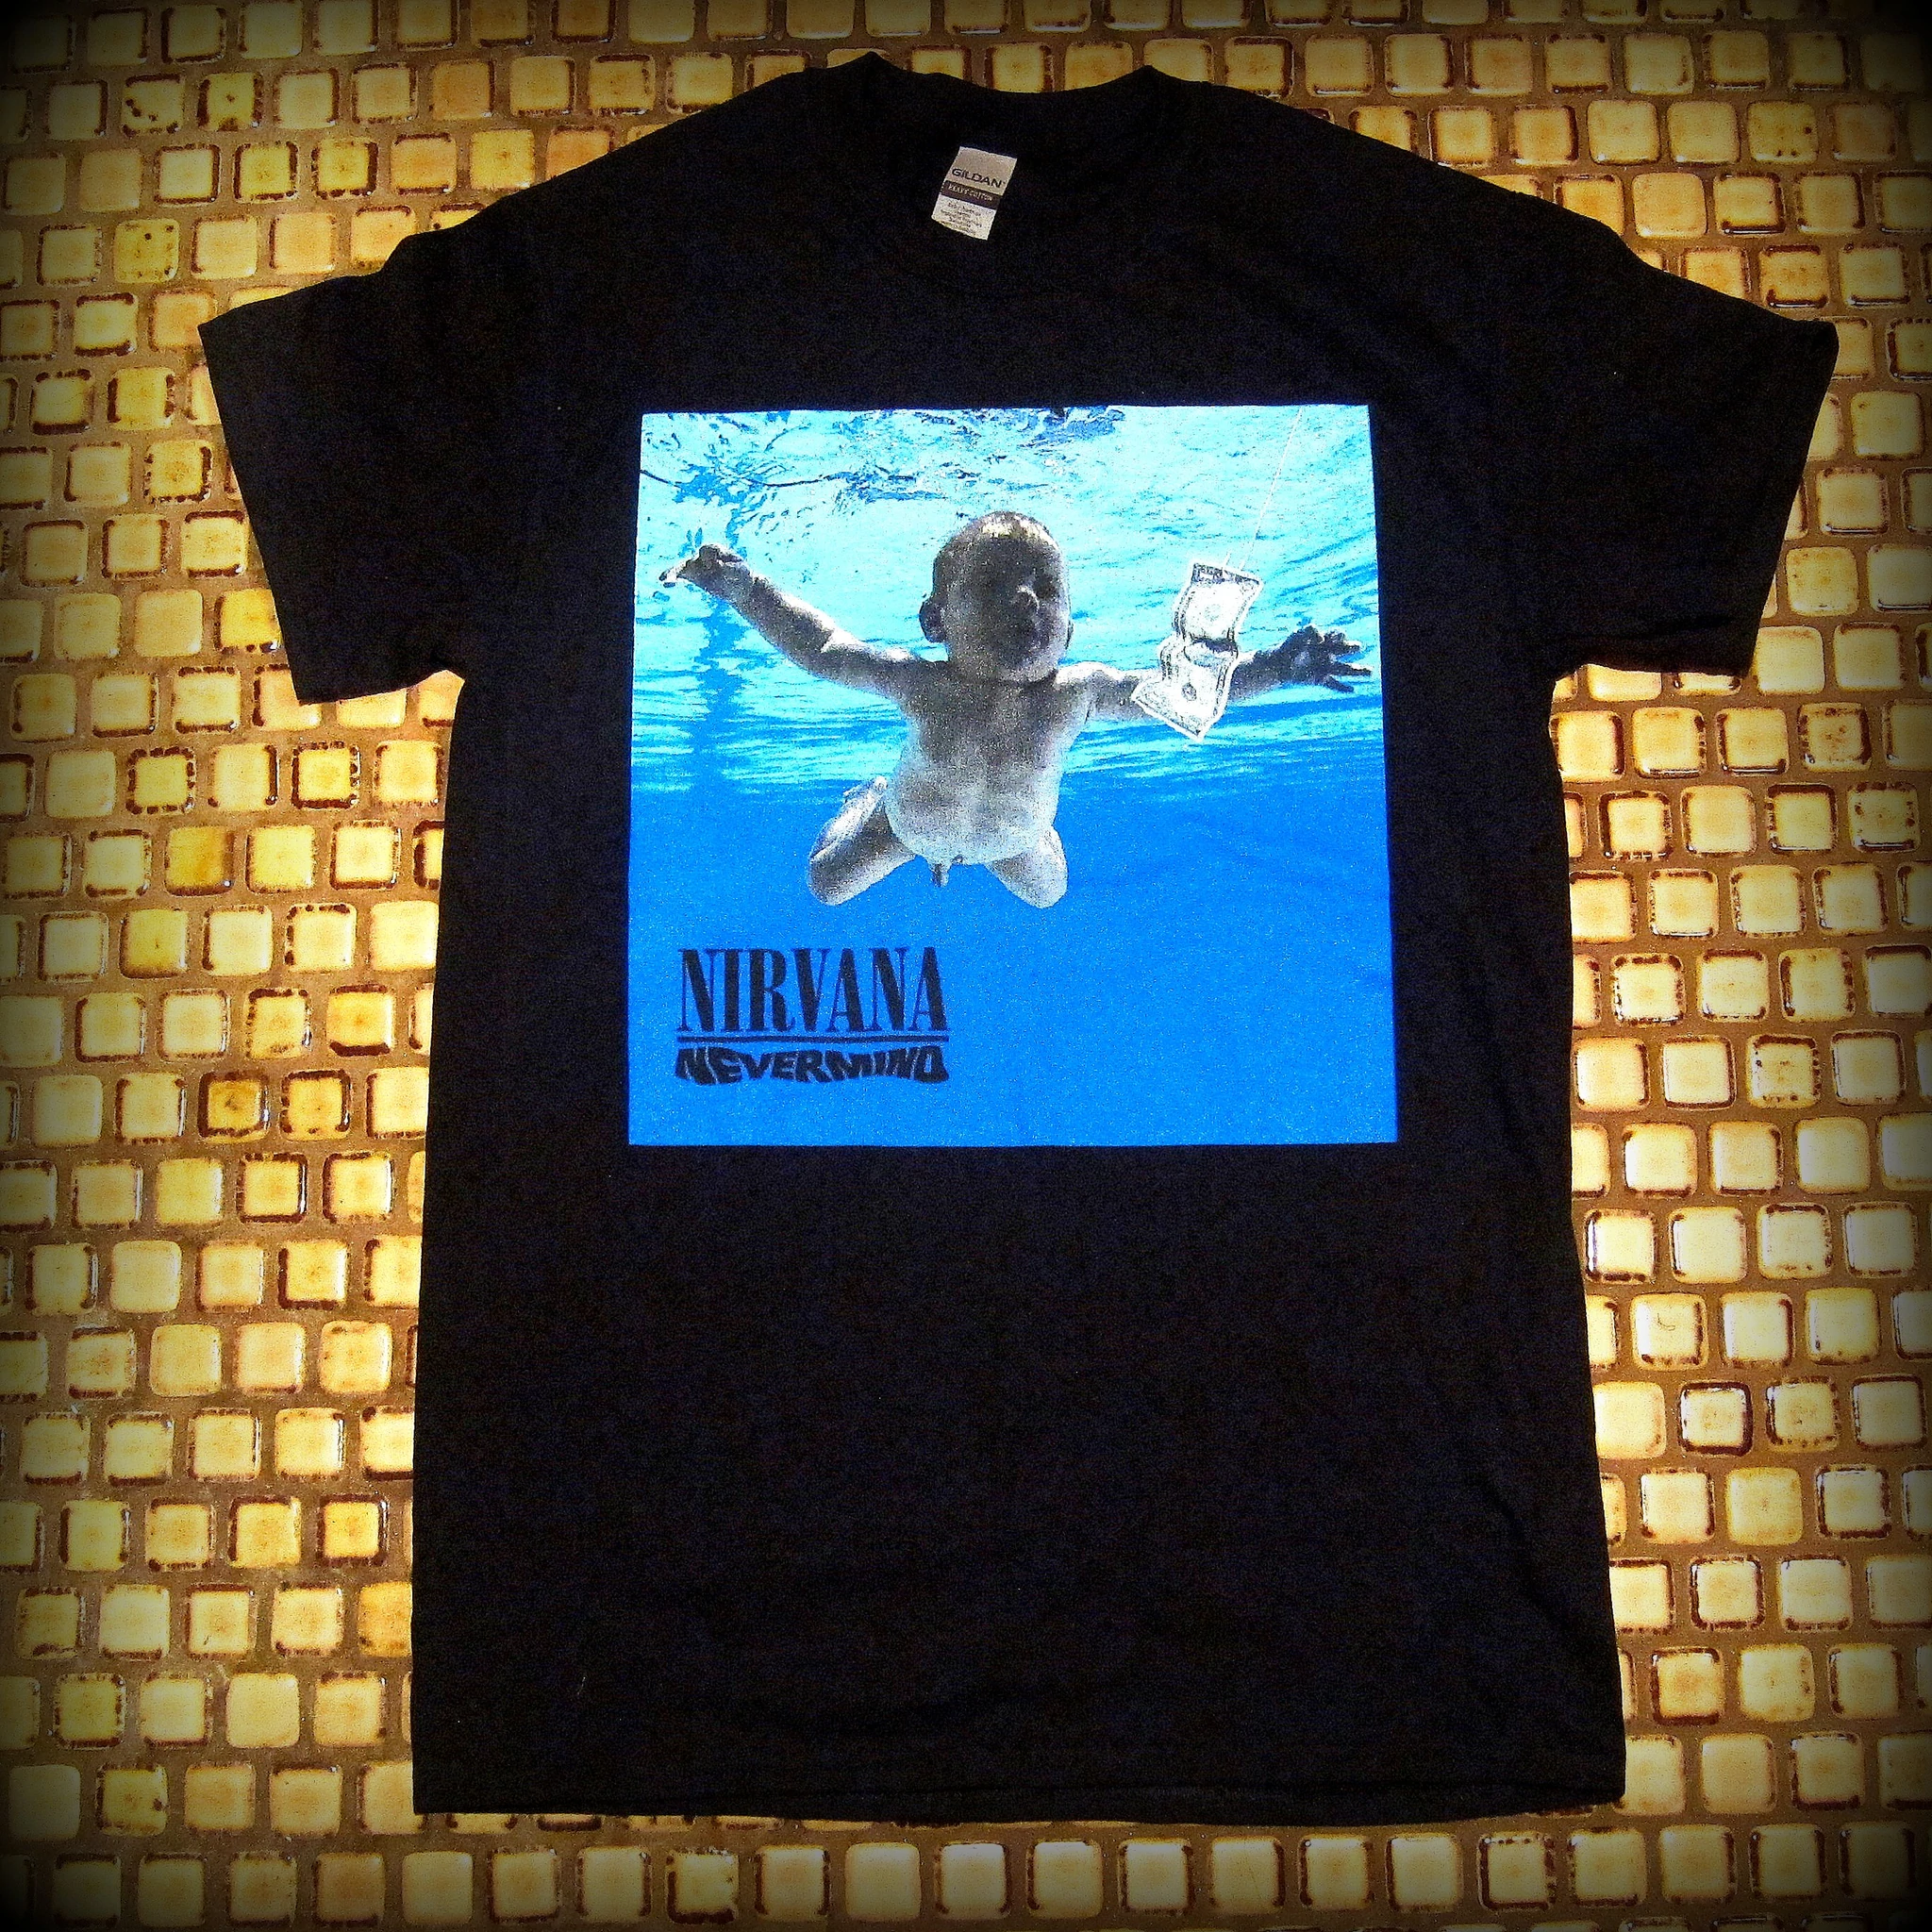 NIRVANA - NEVERMIND - Album Cover -Unisex T- Shirt. Printed Front & Back